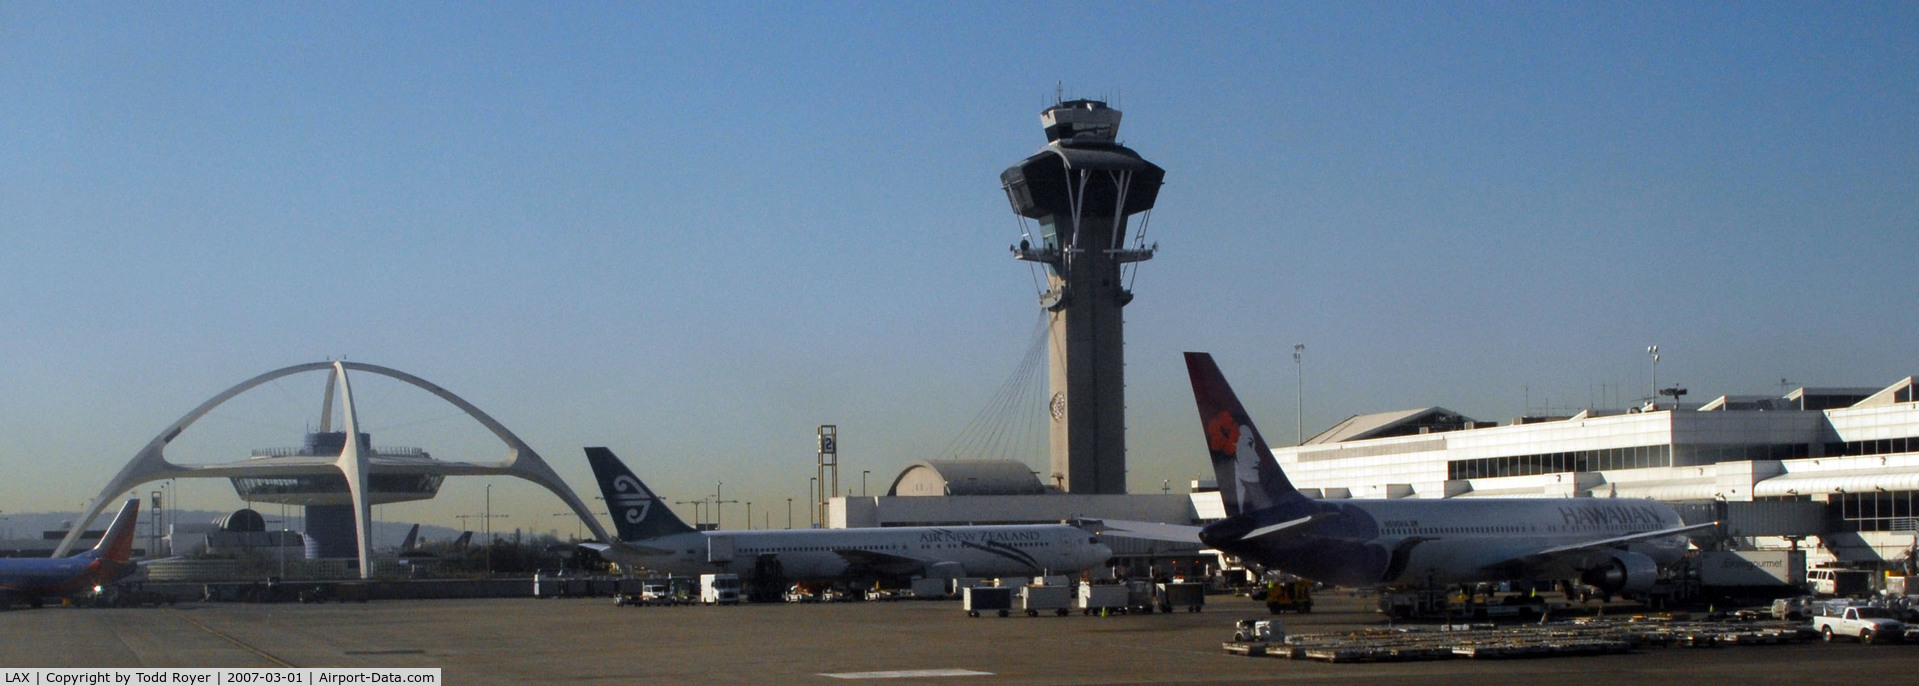 Los Angeles International Airport (LAX) - LAX control tower